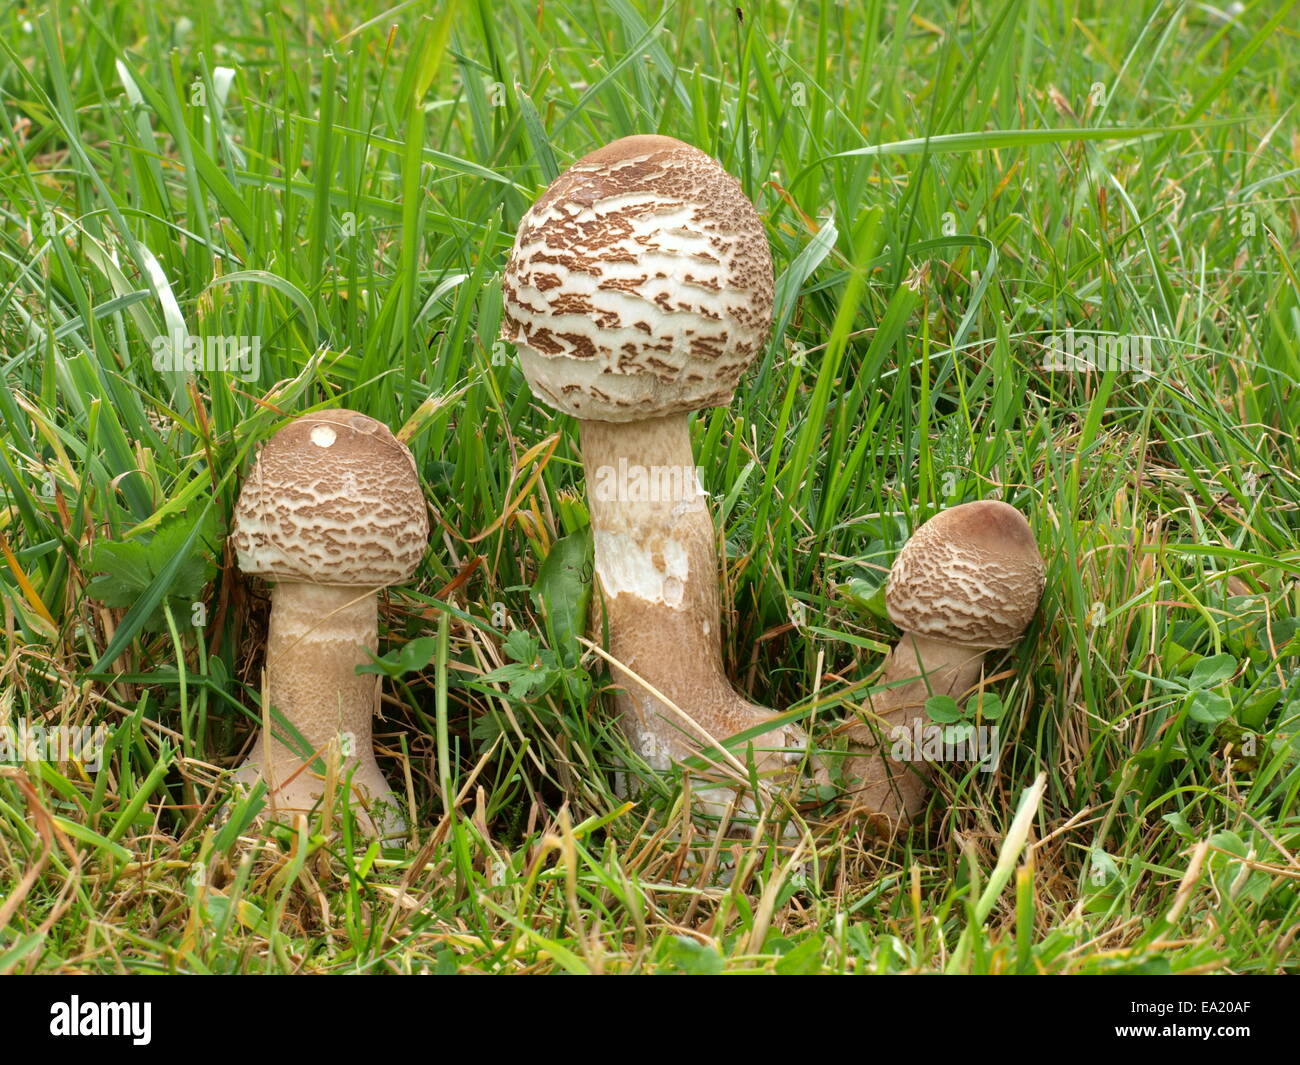 Young Parasol mushrooms on a meadow Stock Photo